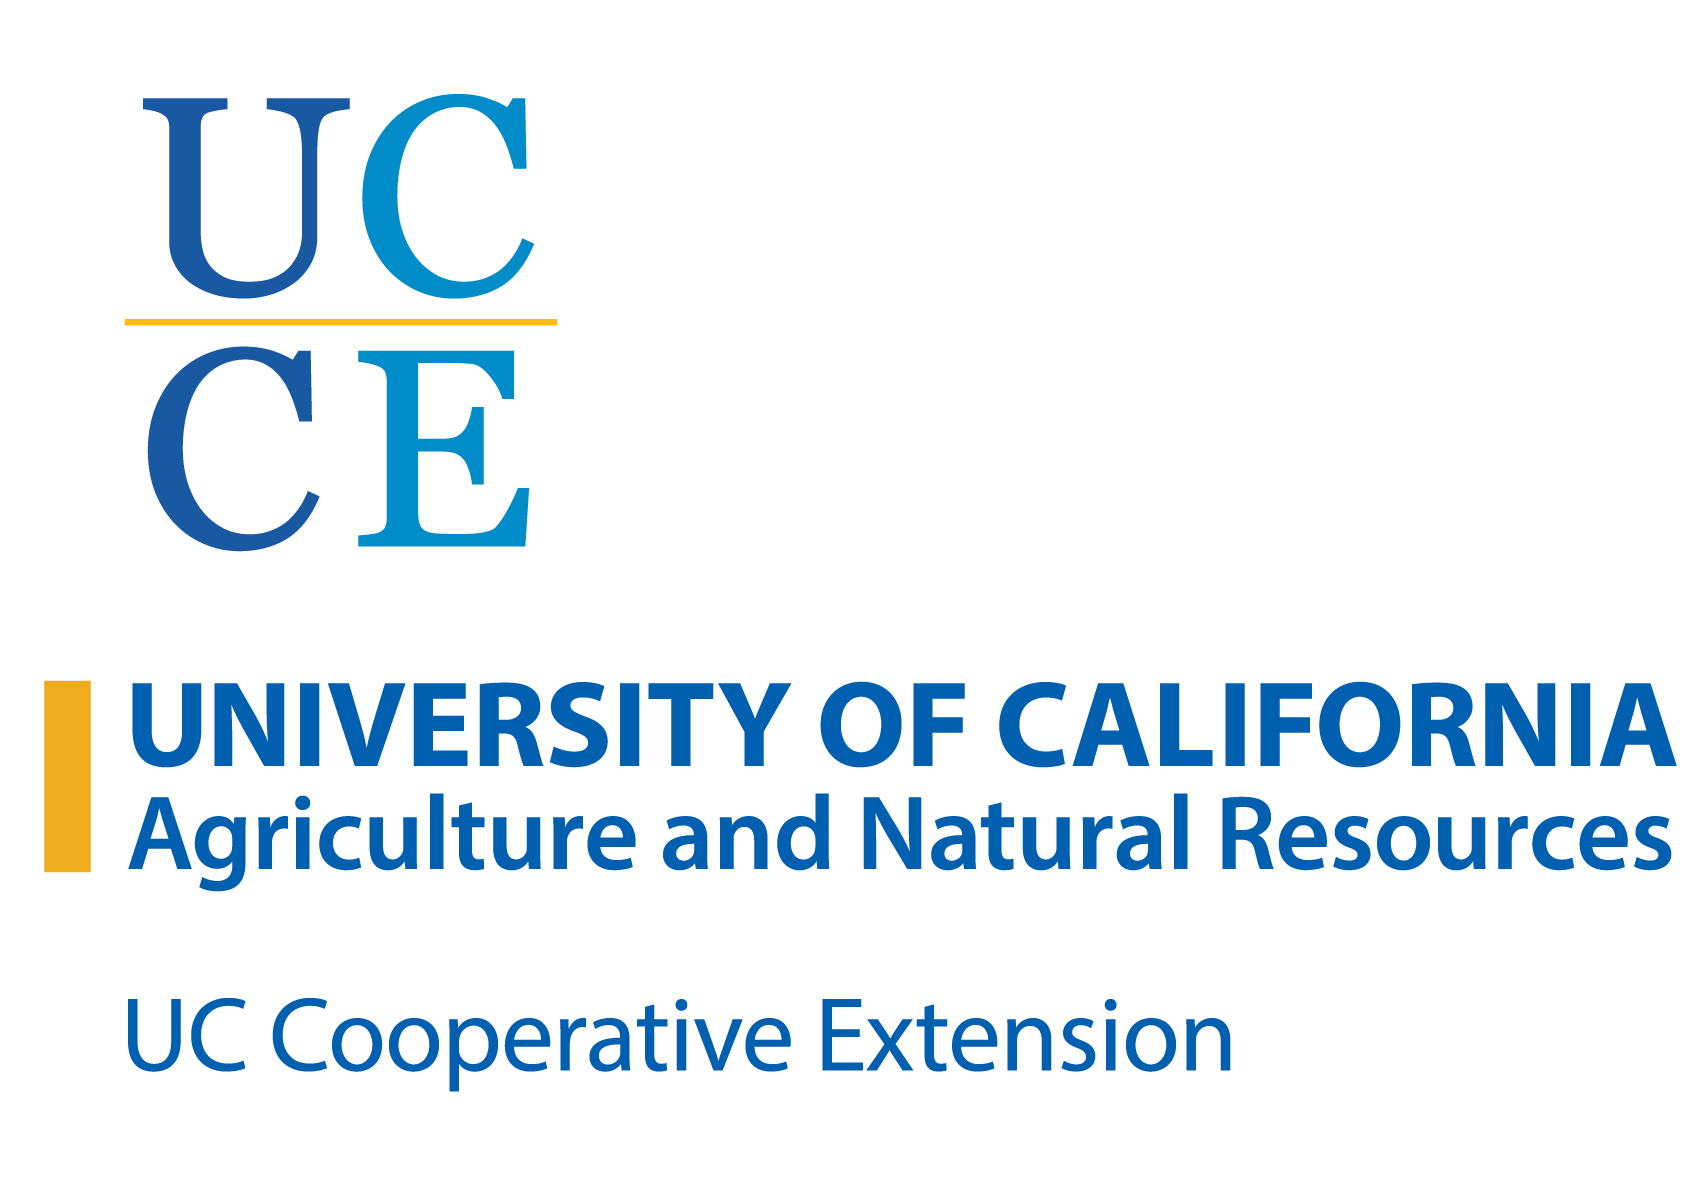 University of California, Agriculture & Natural Resources